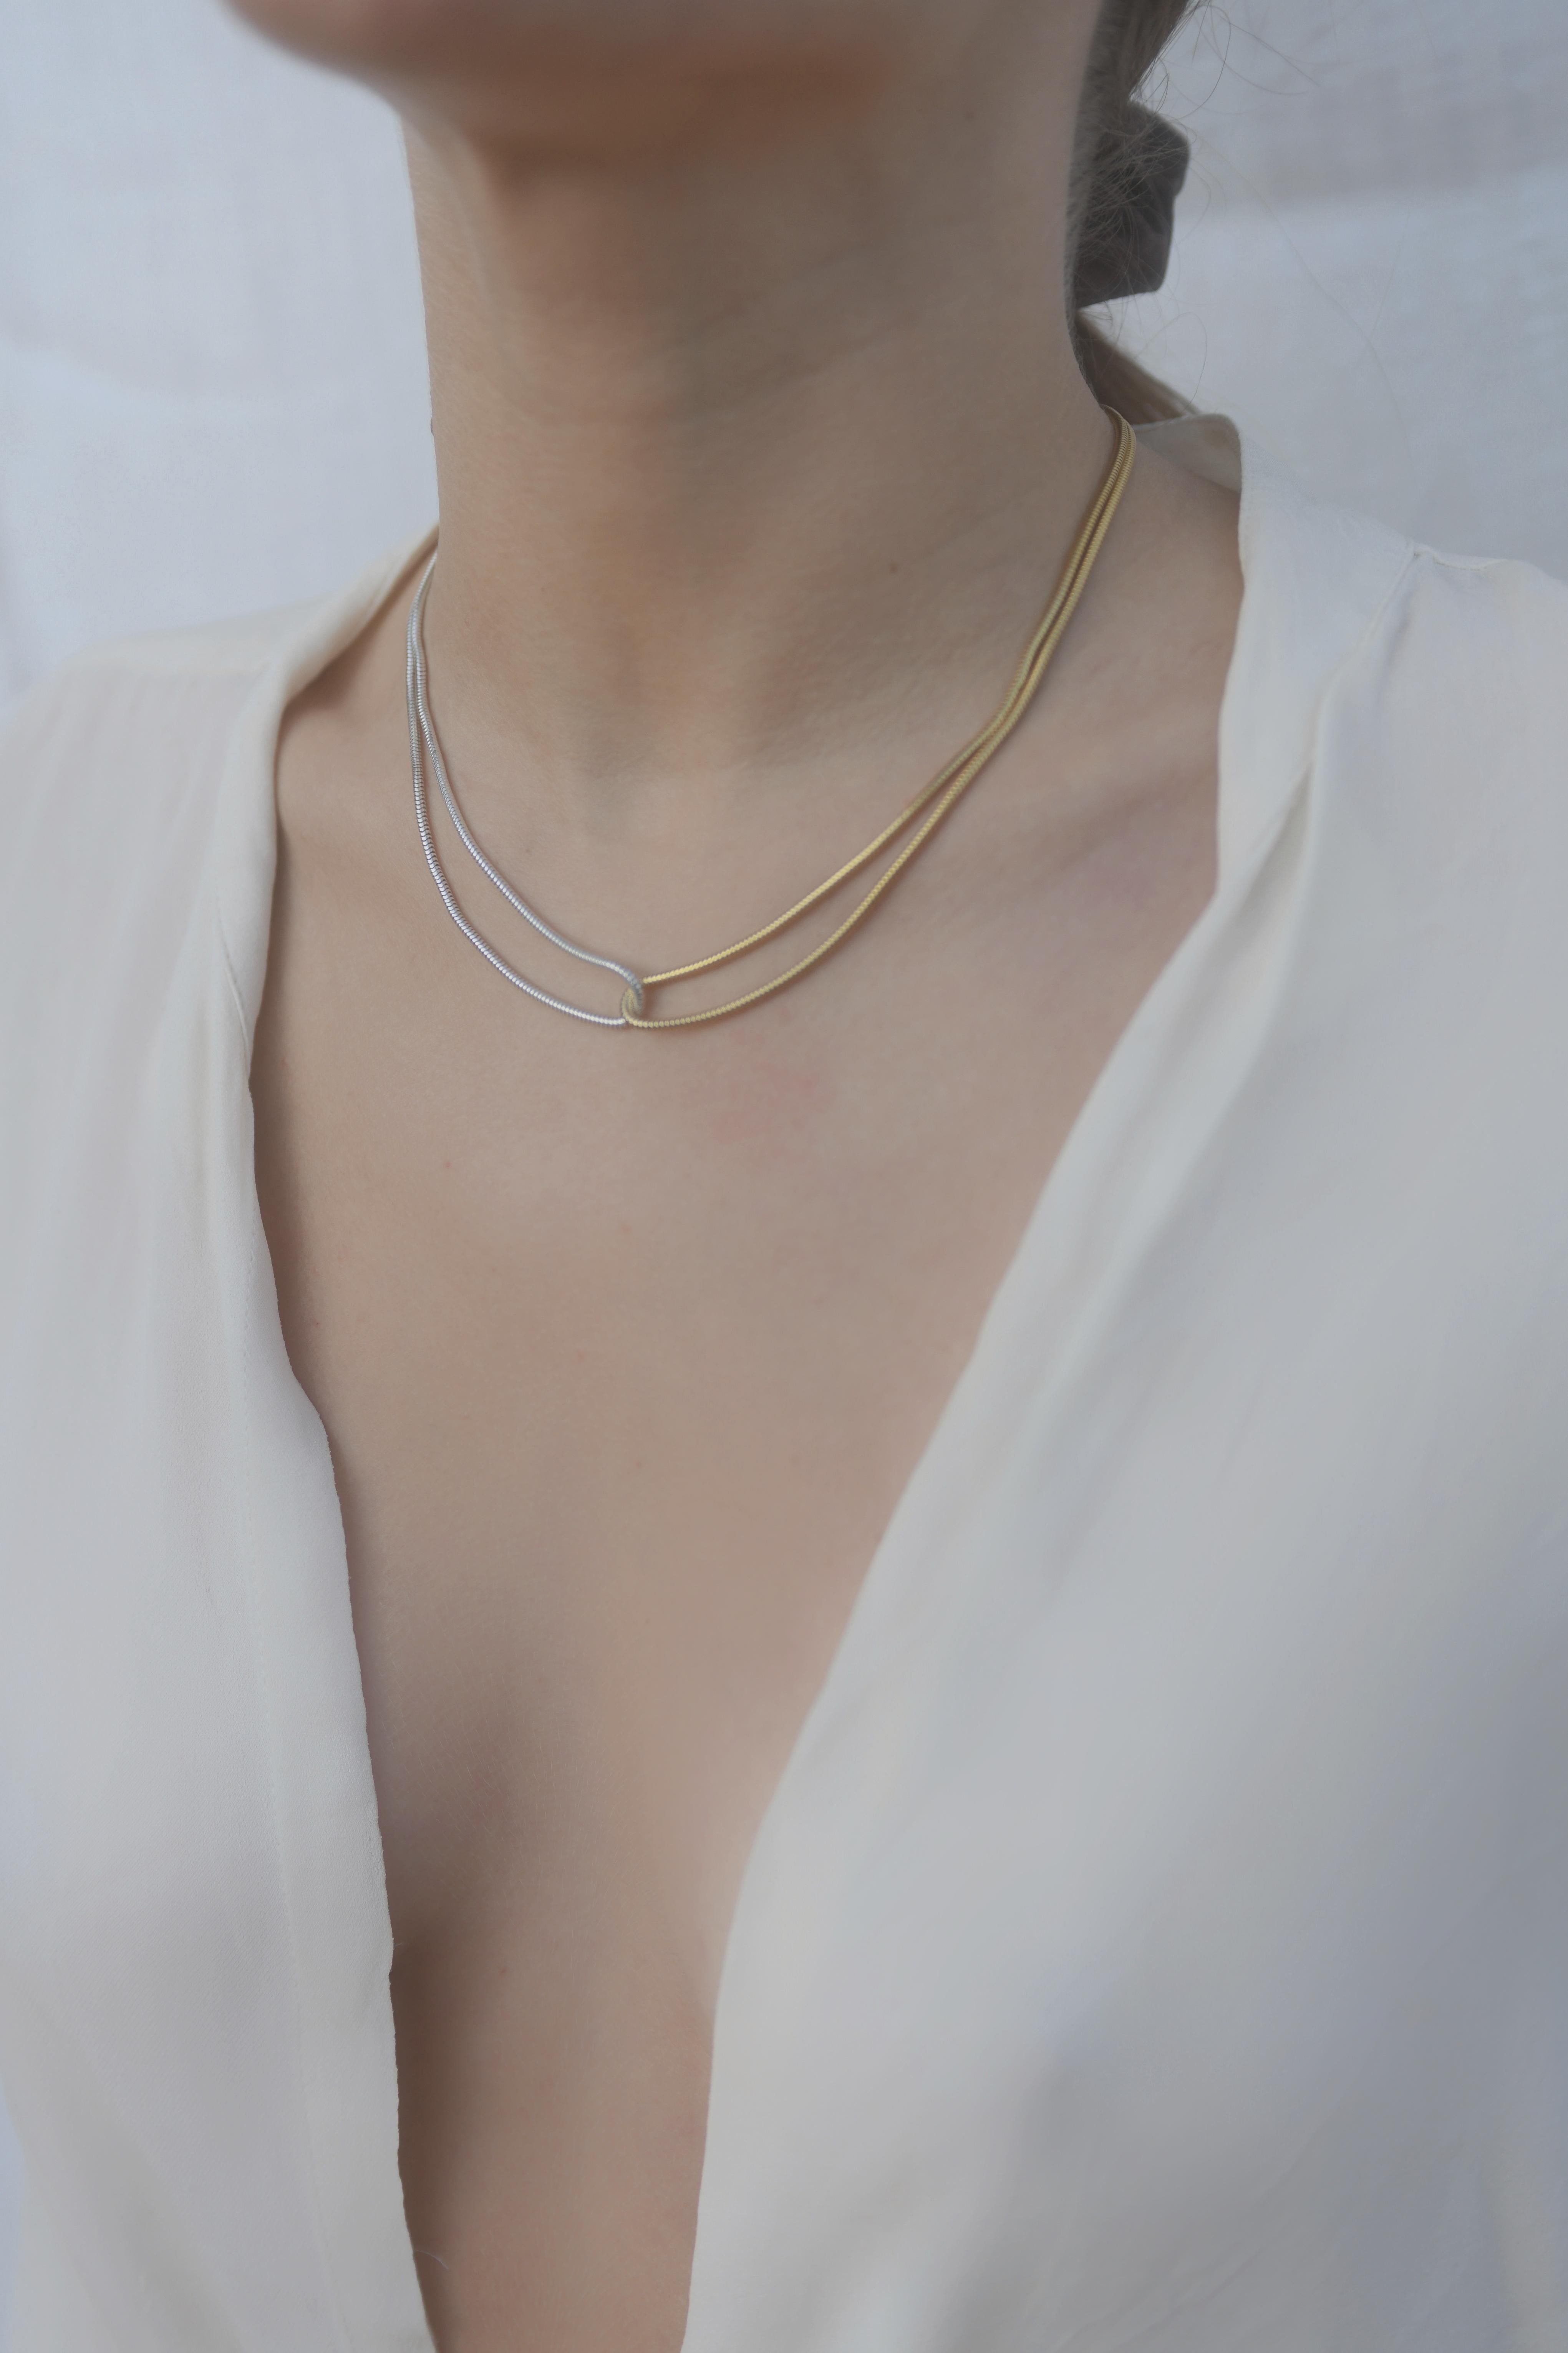 snake chain necklace gold 18k